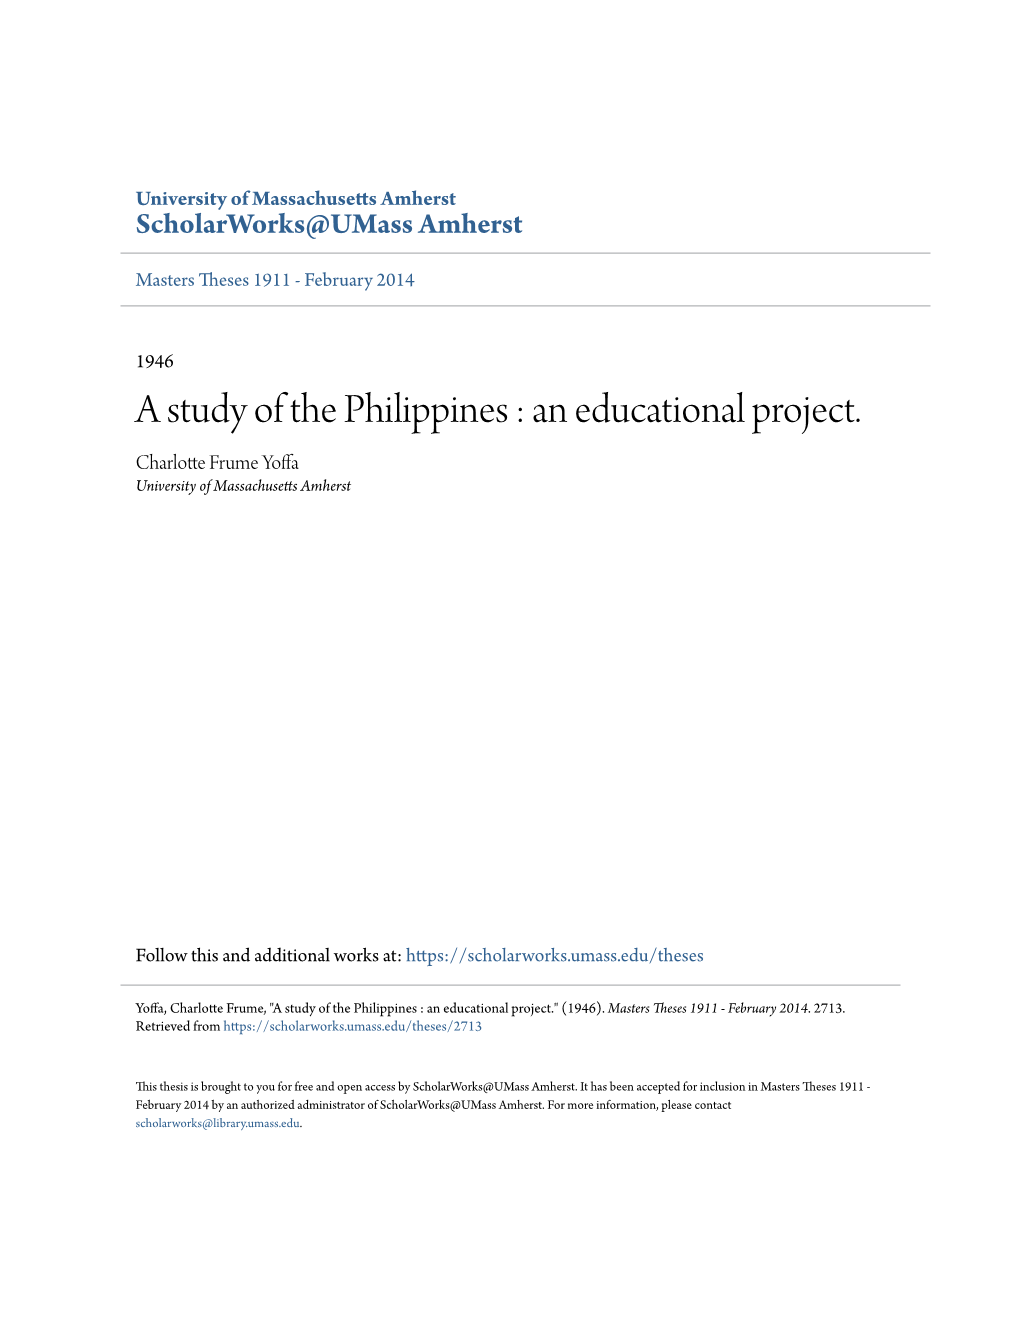 A Study of the Philippines : an Educational Project. Charlotte Frume Yoffa University of Massachusetts Amherst